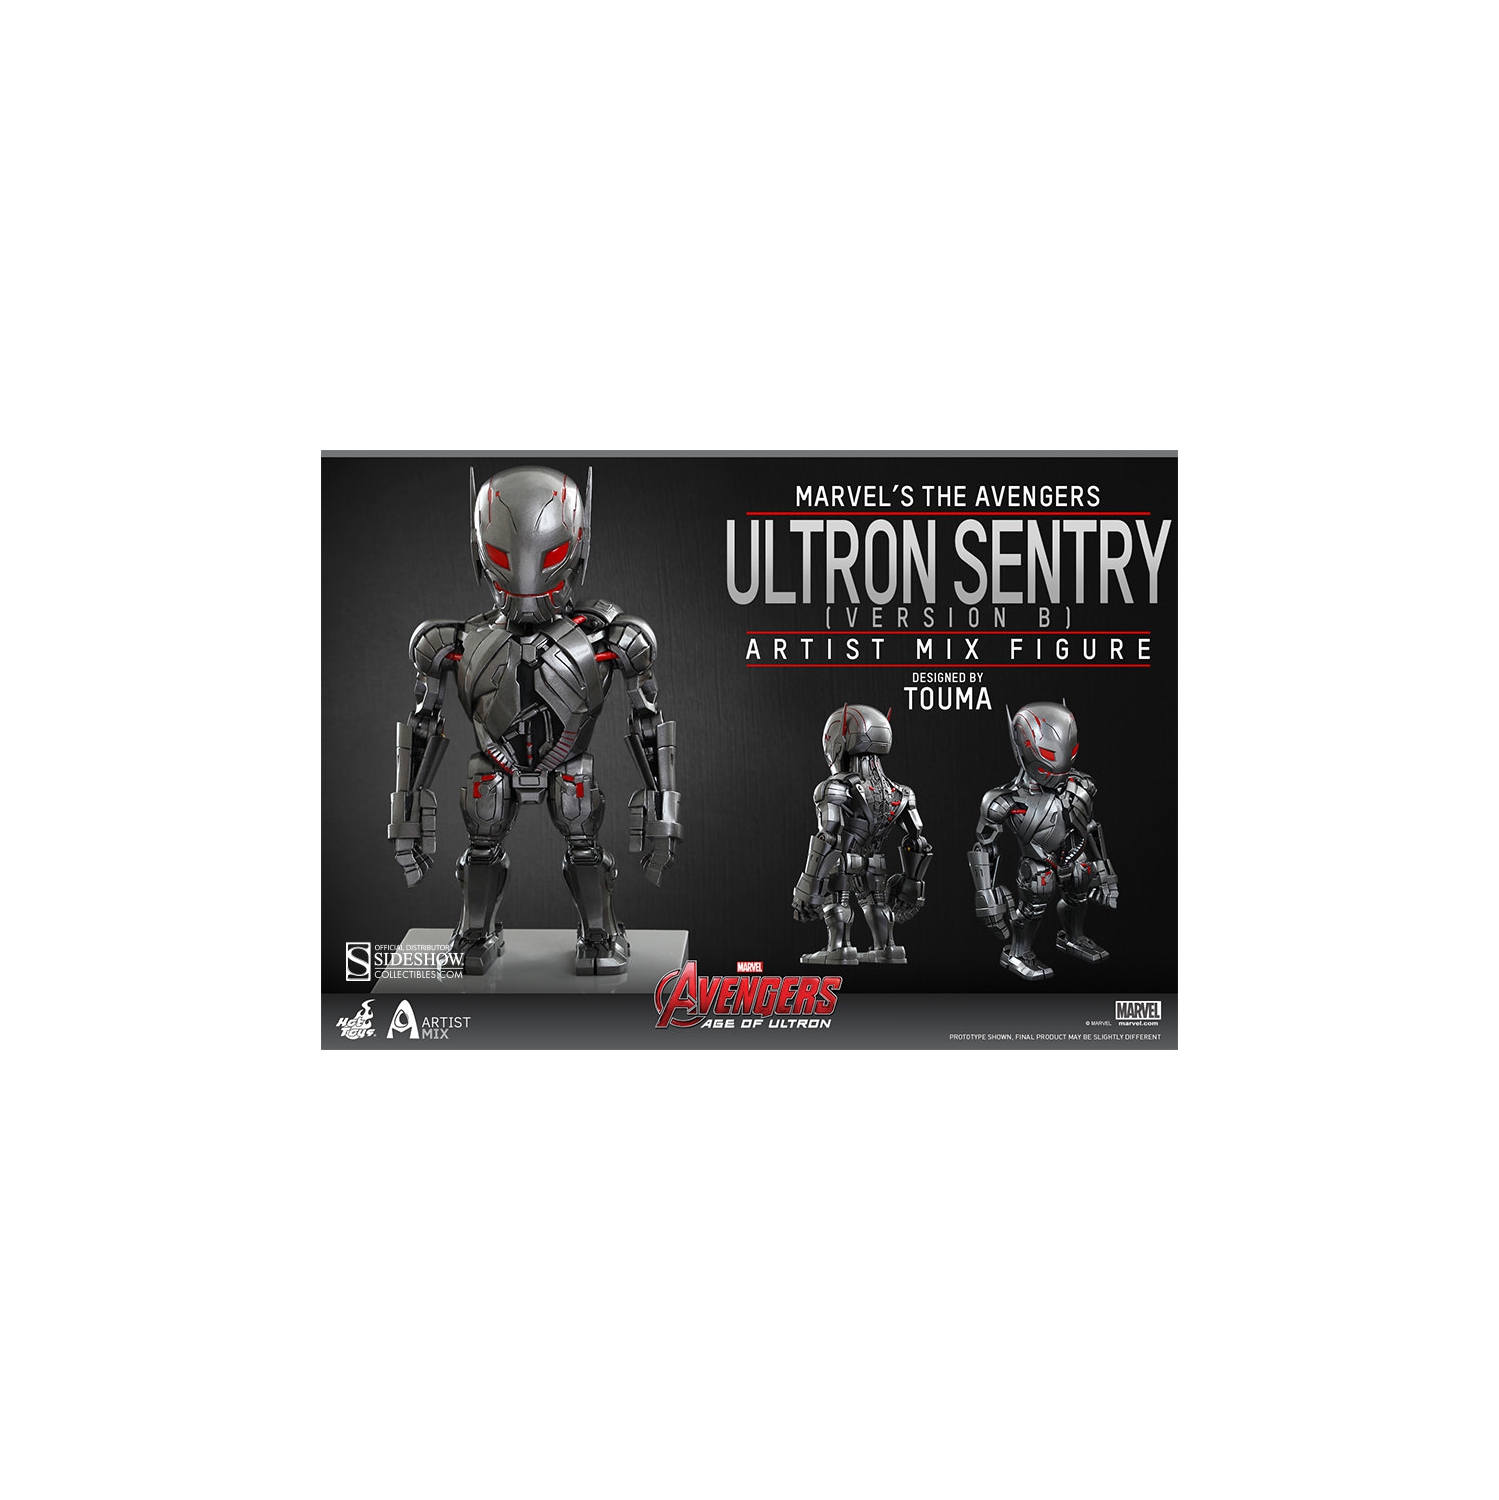 Avengers: Age of Ultron 6 Inch Action Figure Artist Mix Series 1 - Ultron Sentry Version B Hot Toys